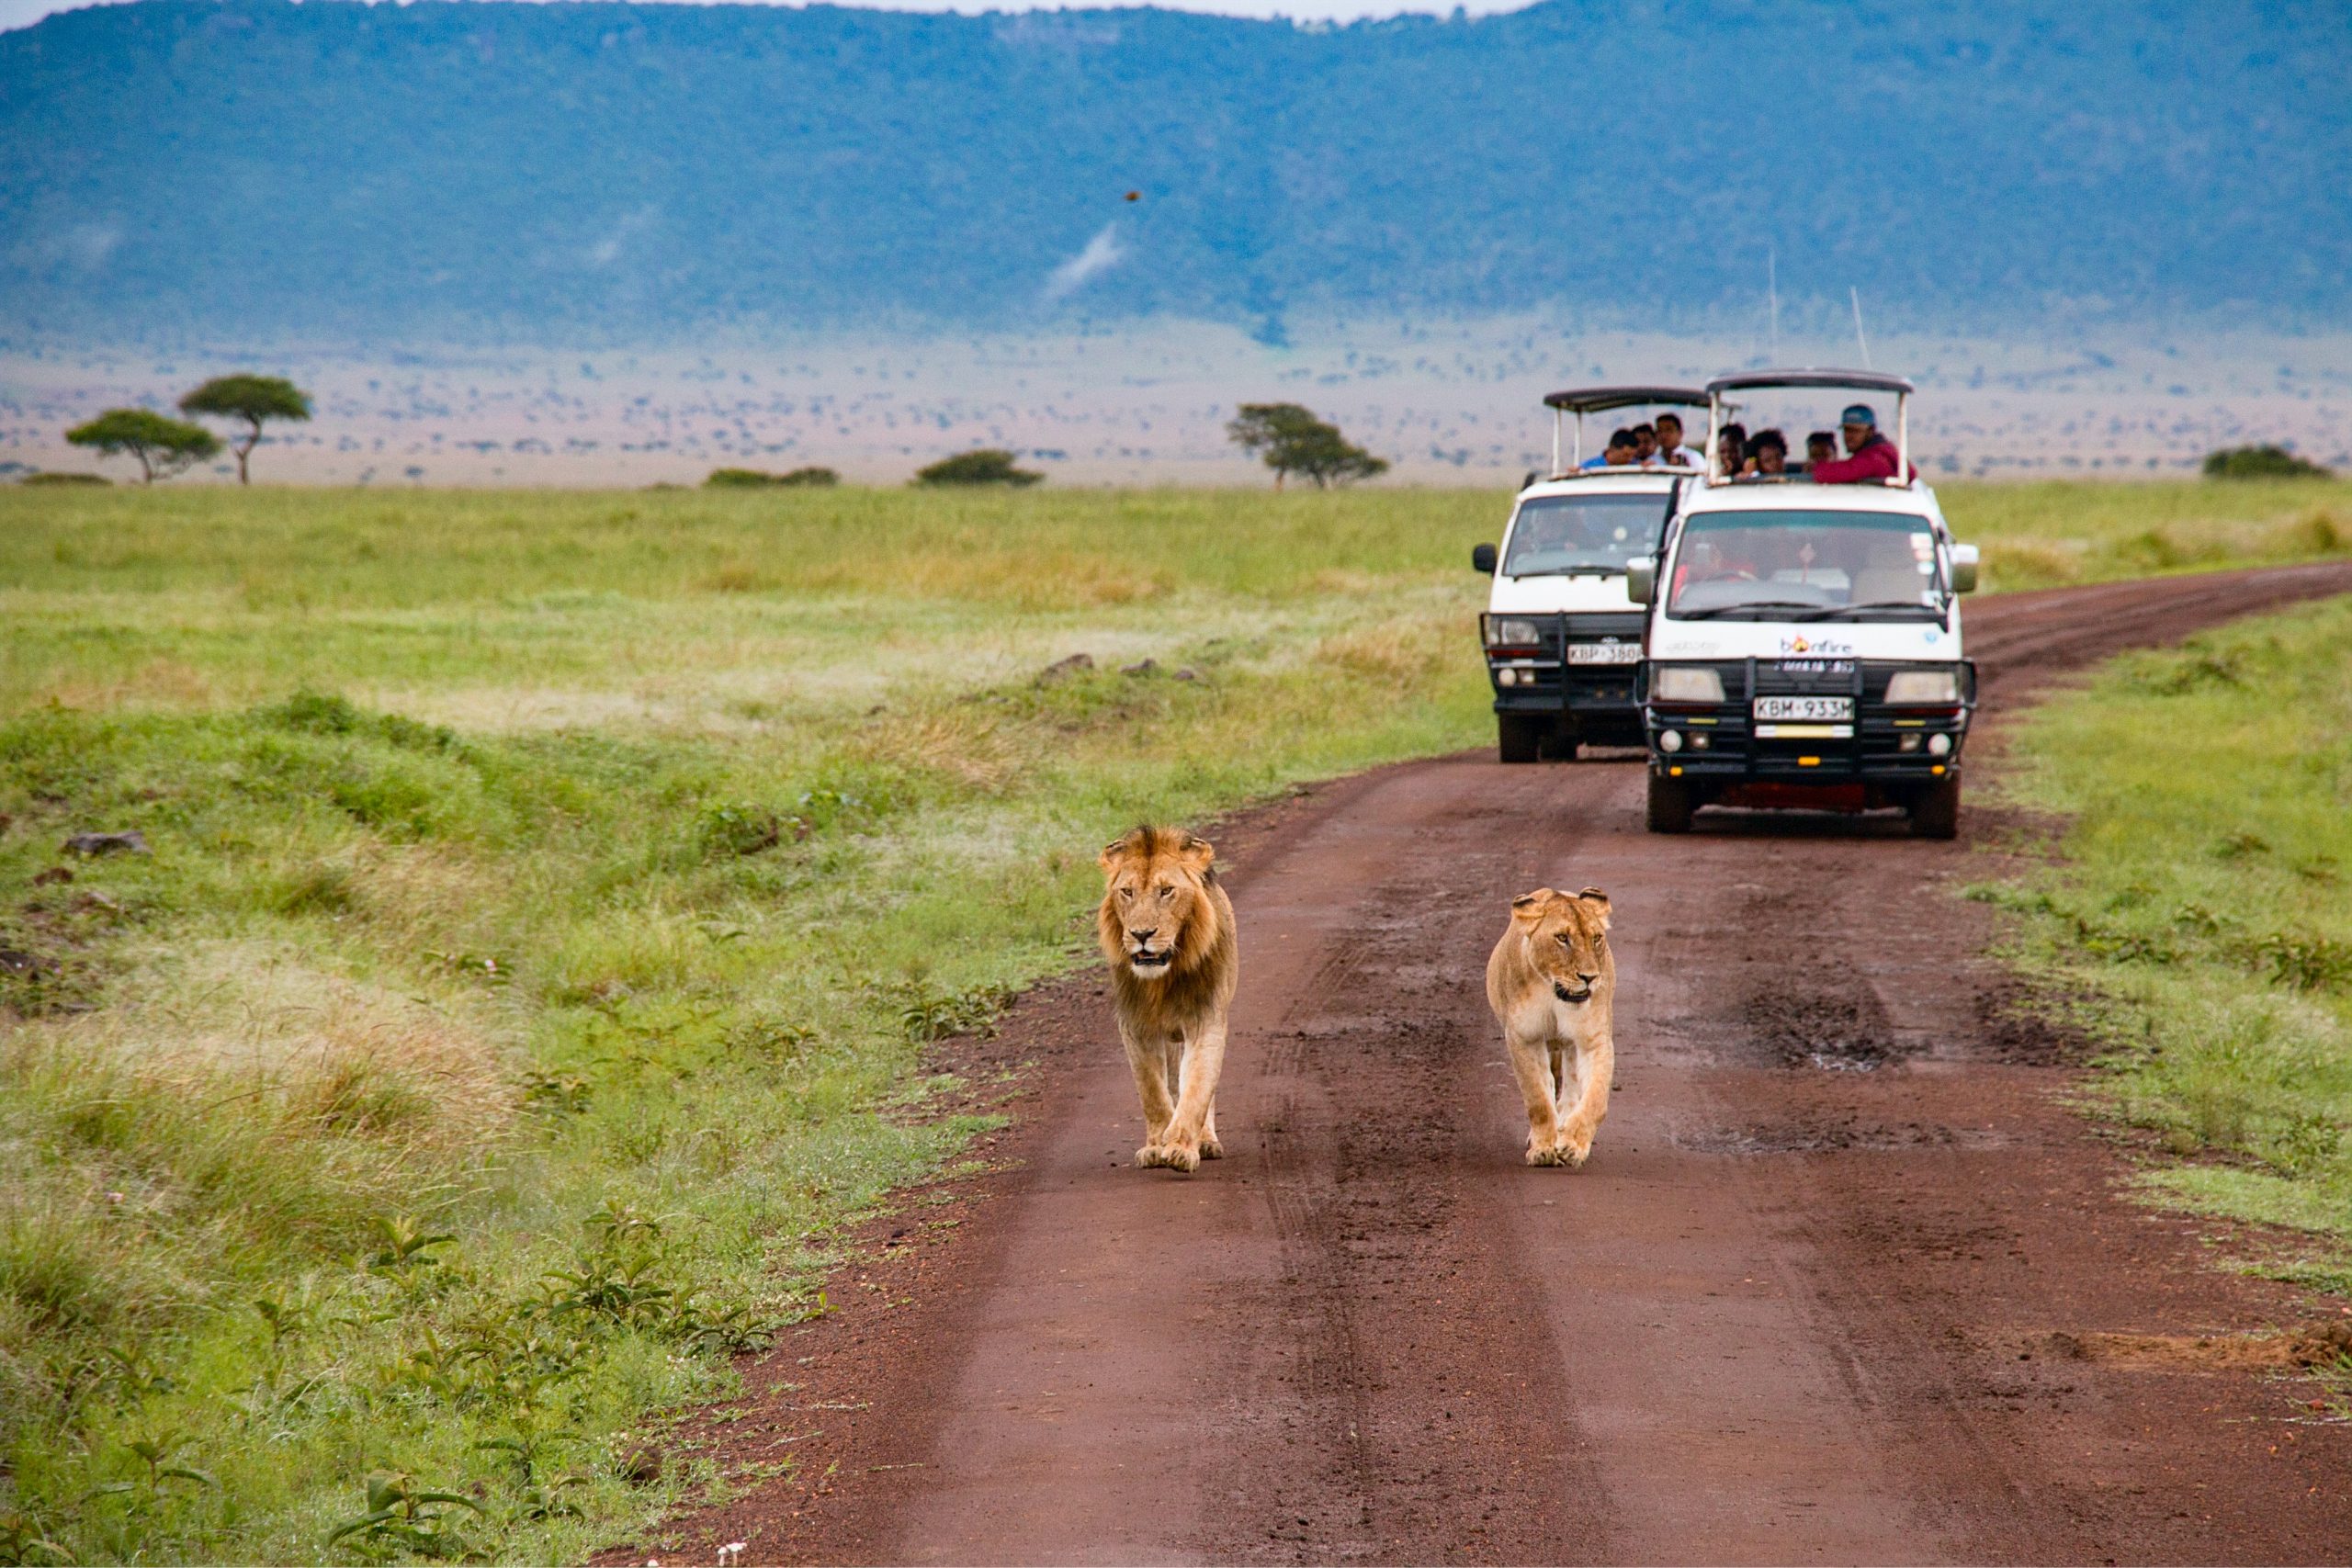 On safari two tourist cars keep a safe distance from the two lions in front of them.